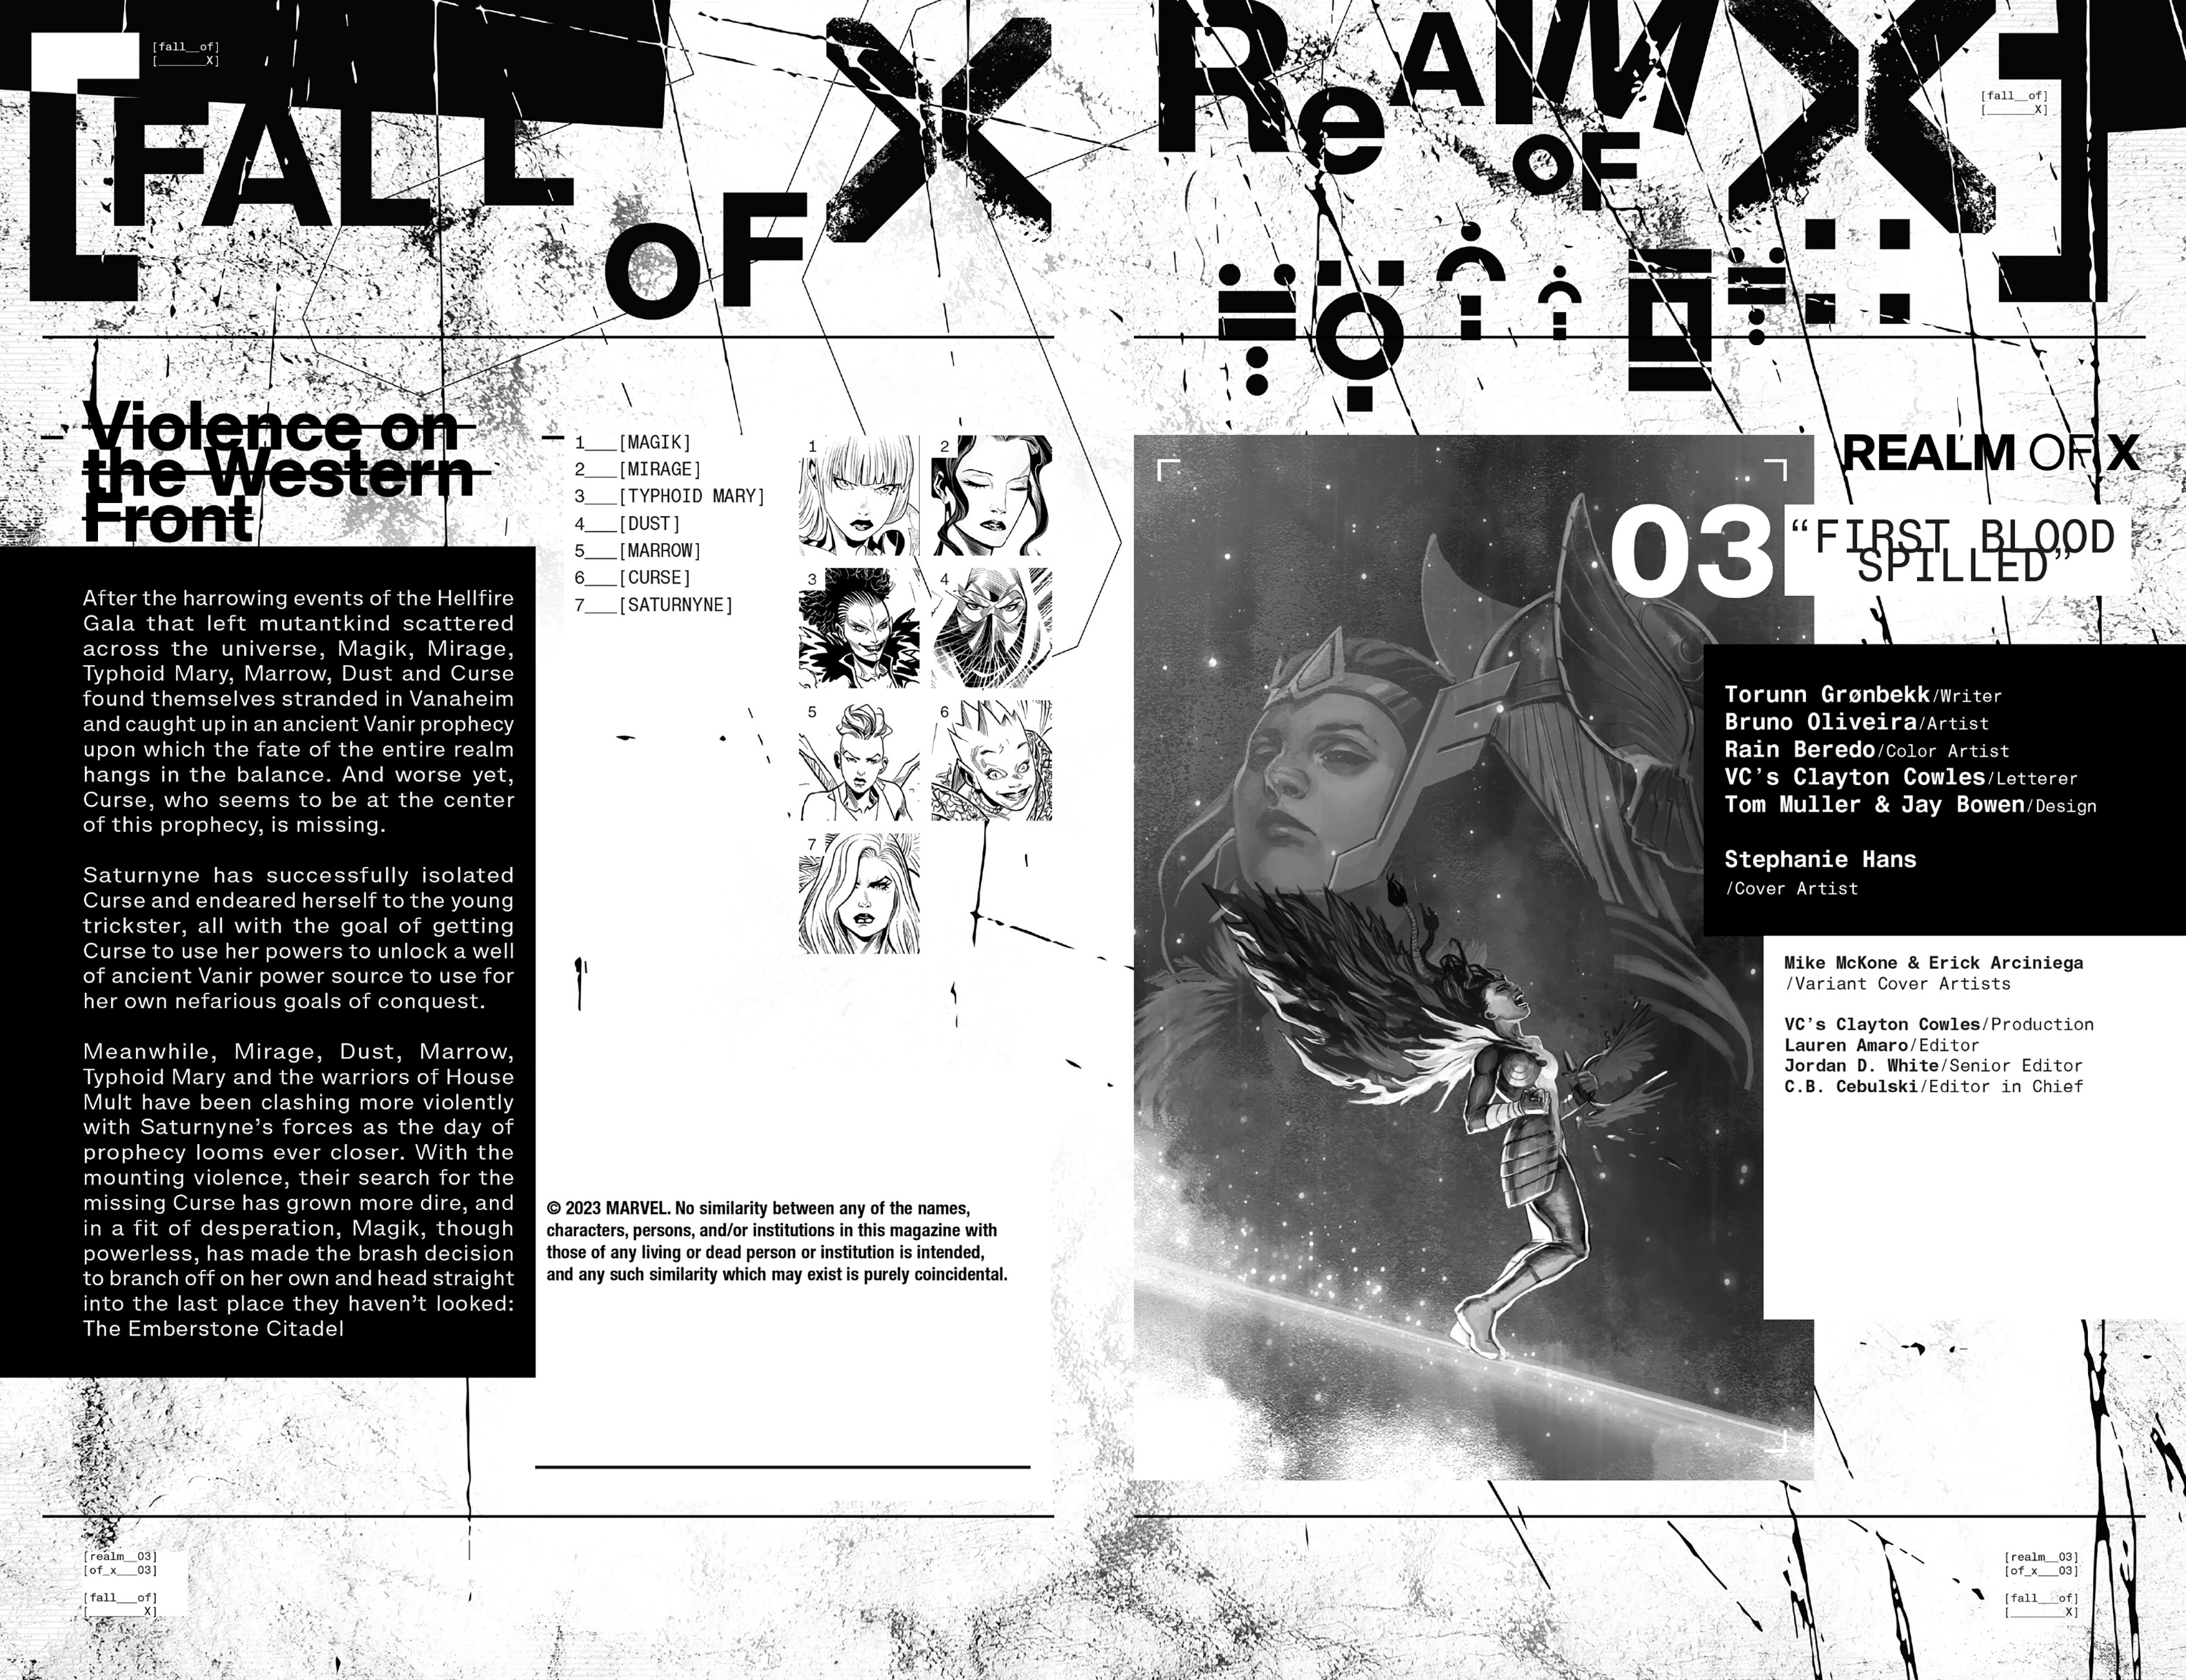 Read online Realm of X comic -  Issue #3 - 6